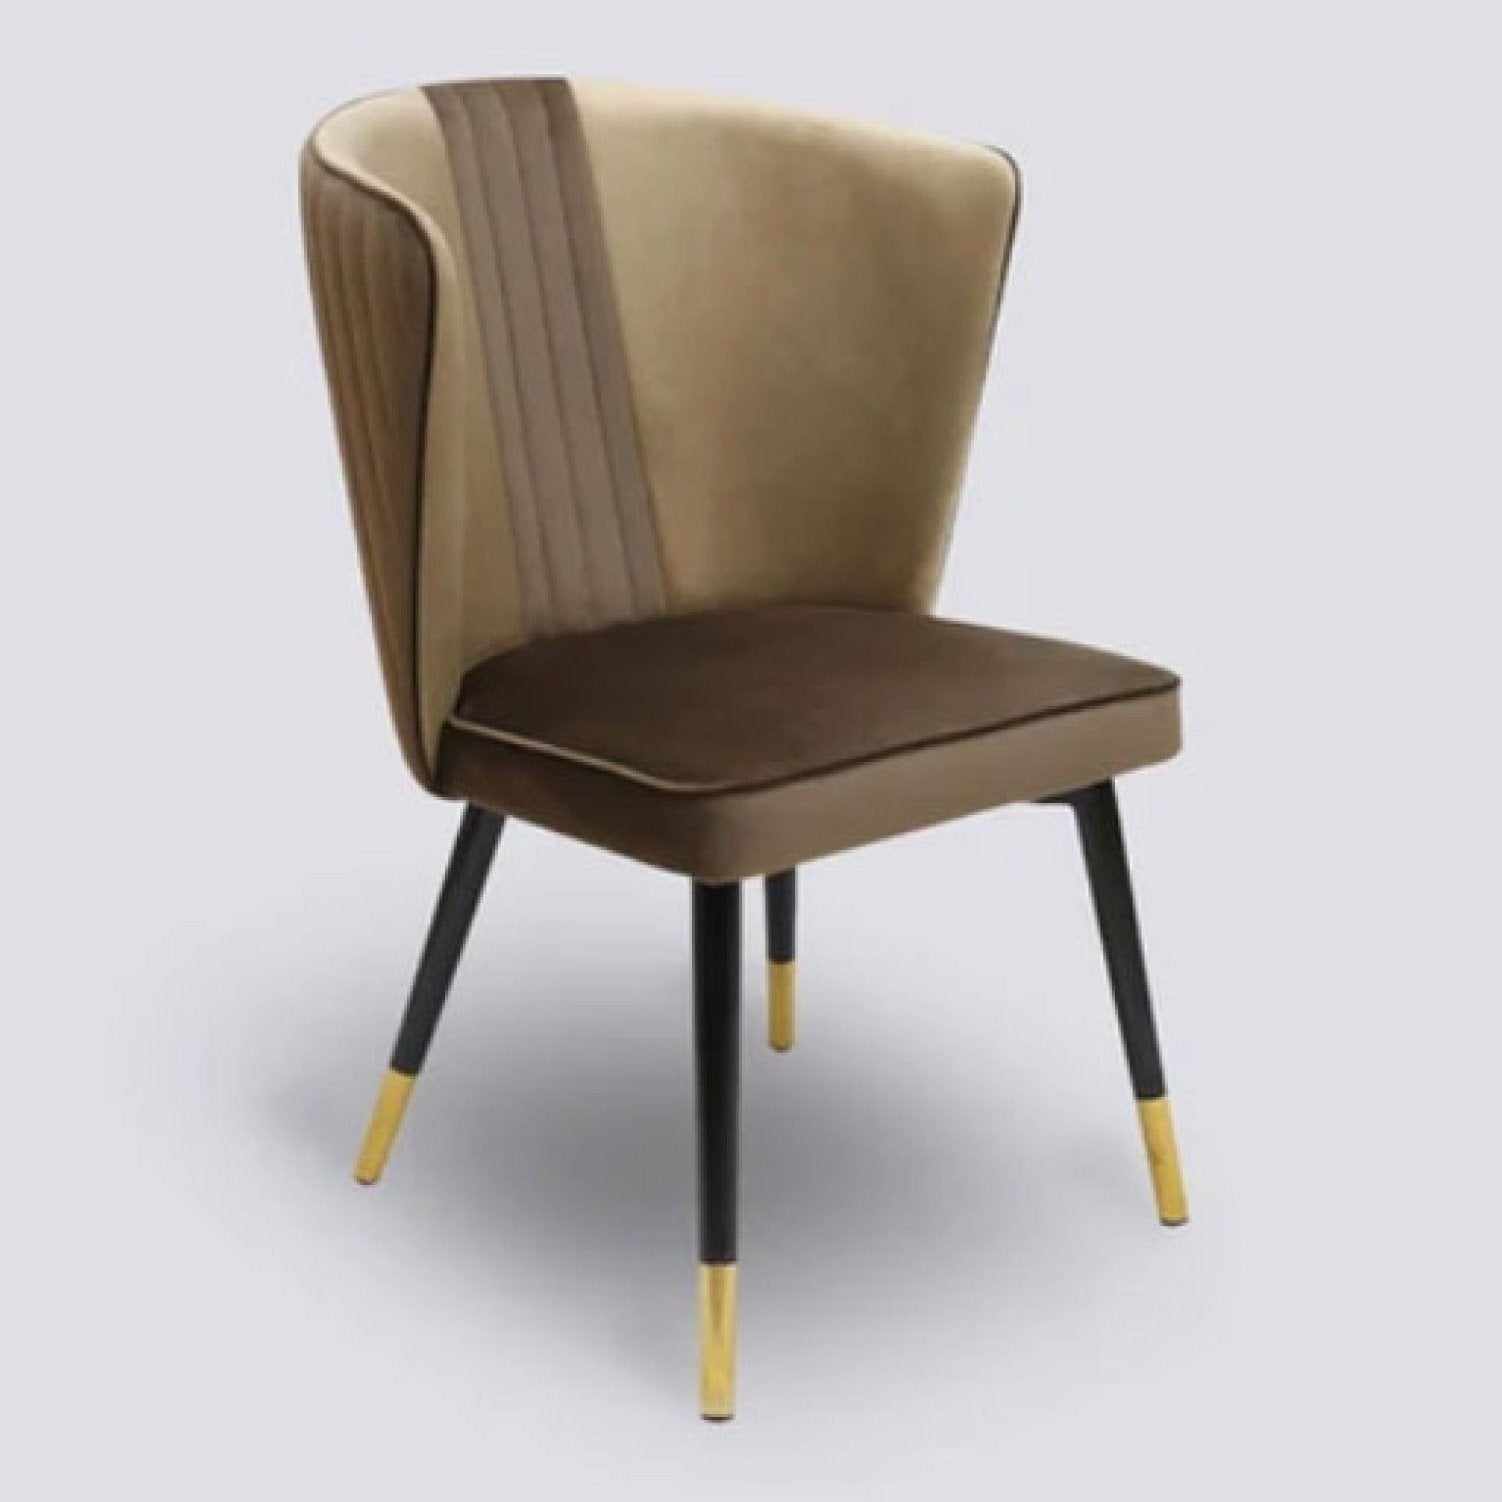 LUX-490 WRAP DINING CHAIR MoBEL Furniture